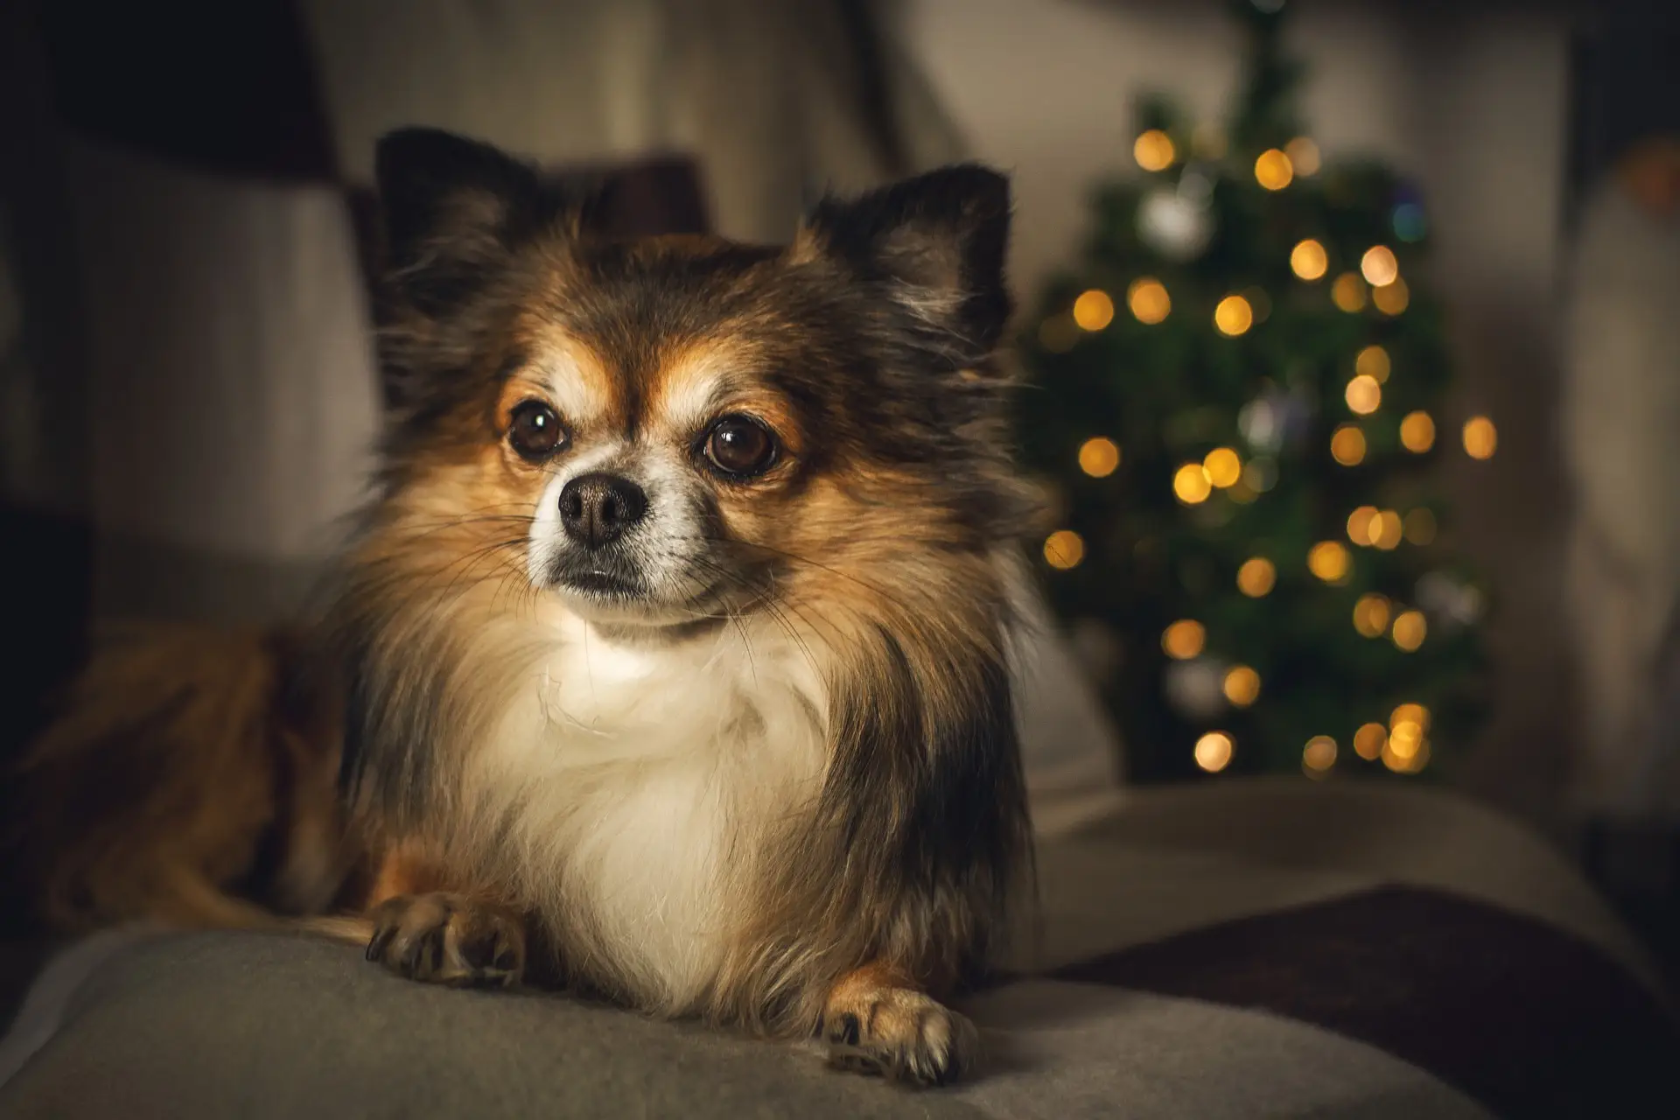 Dog indoors with lit Christmas tree in background